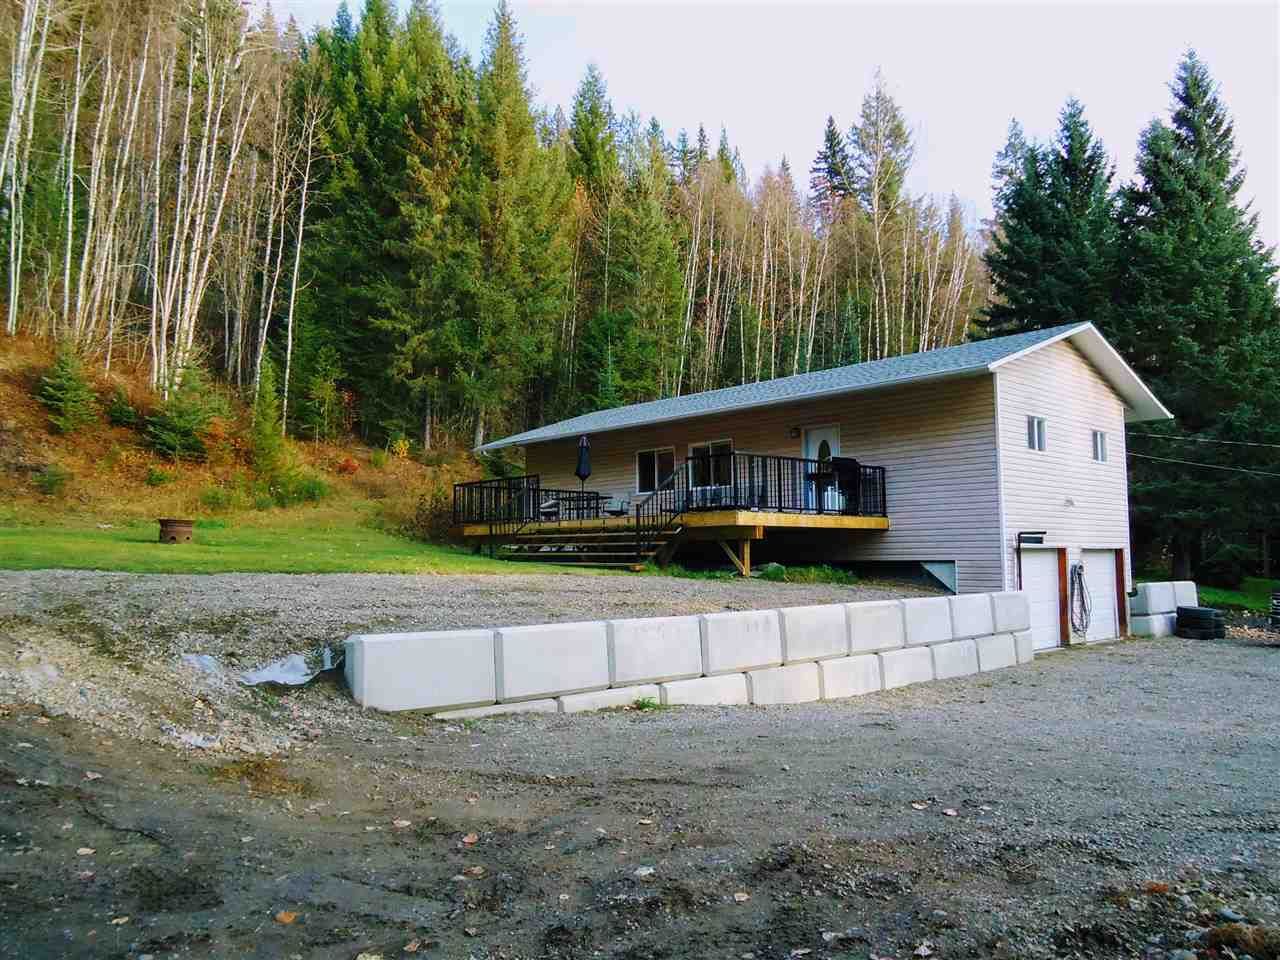 Main Photo: 4935 CHAMULAK Road in Prince George: Red Rock/Stoner House for sale (PG Rural South (Zone 78))  : MLS®# R2448586